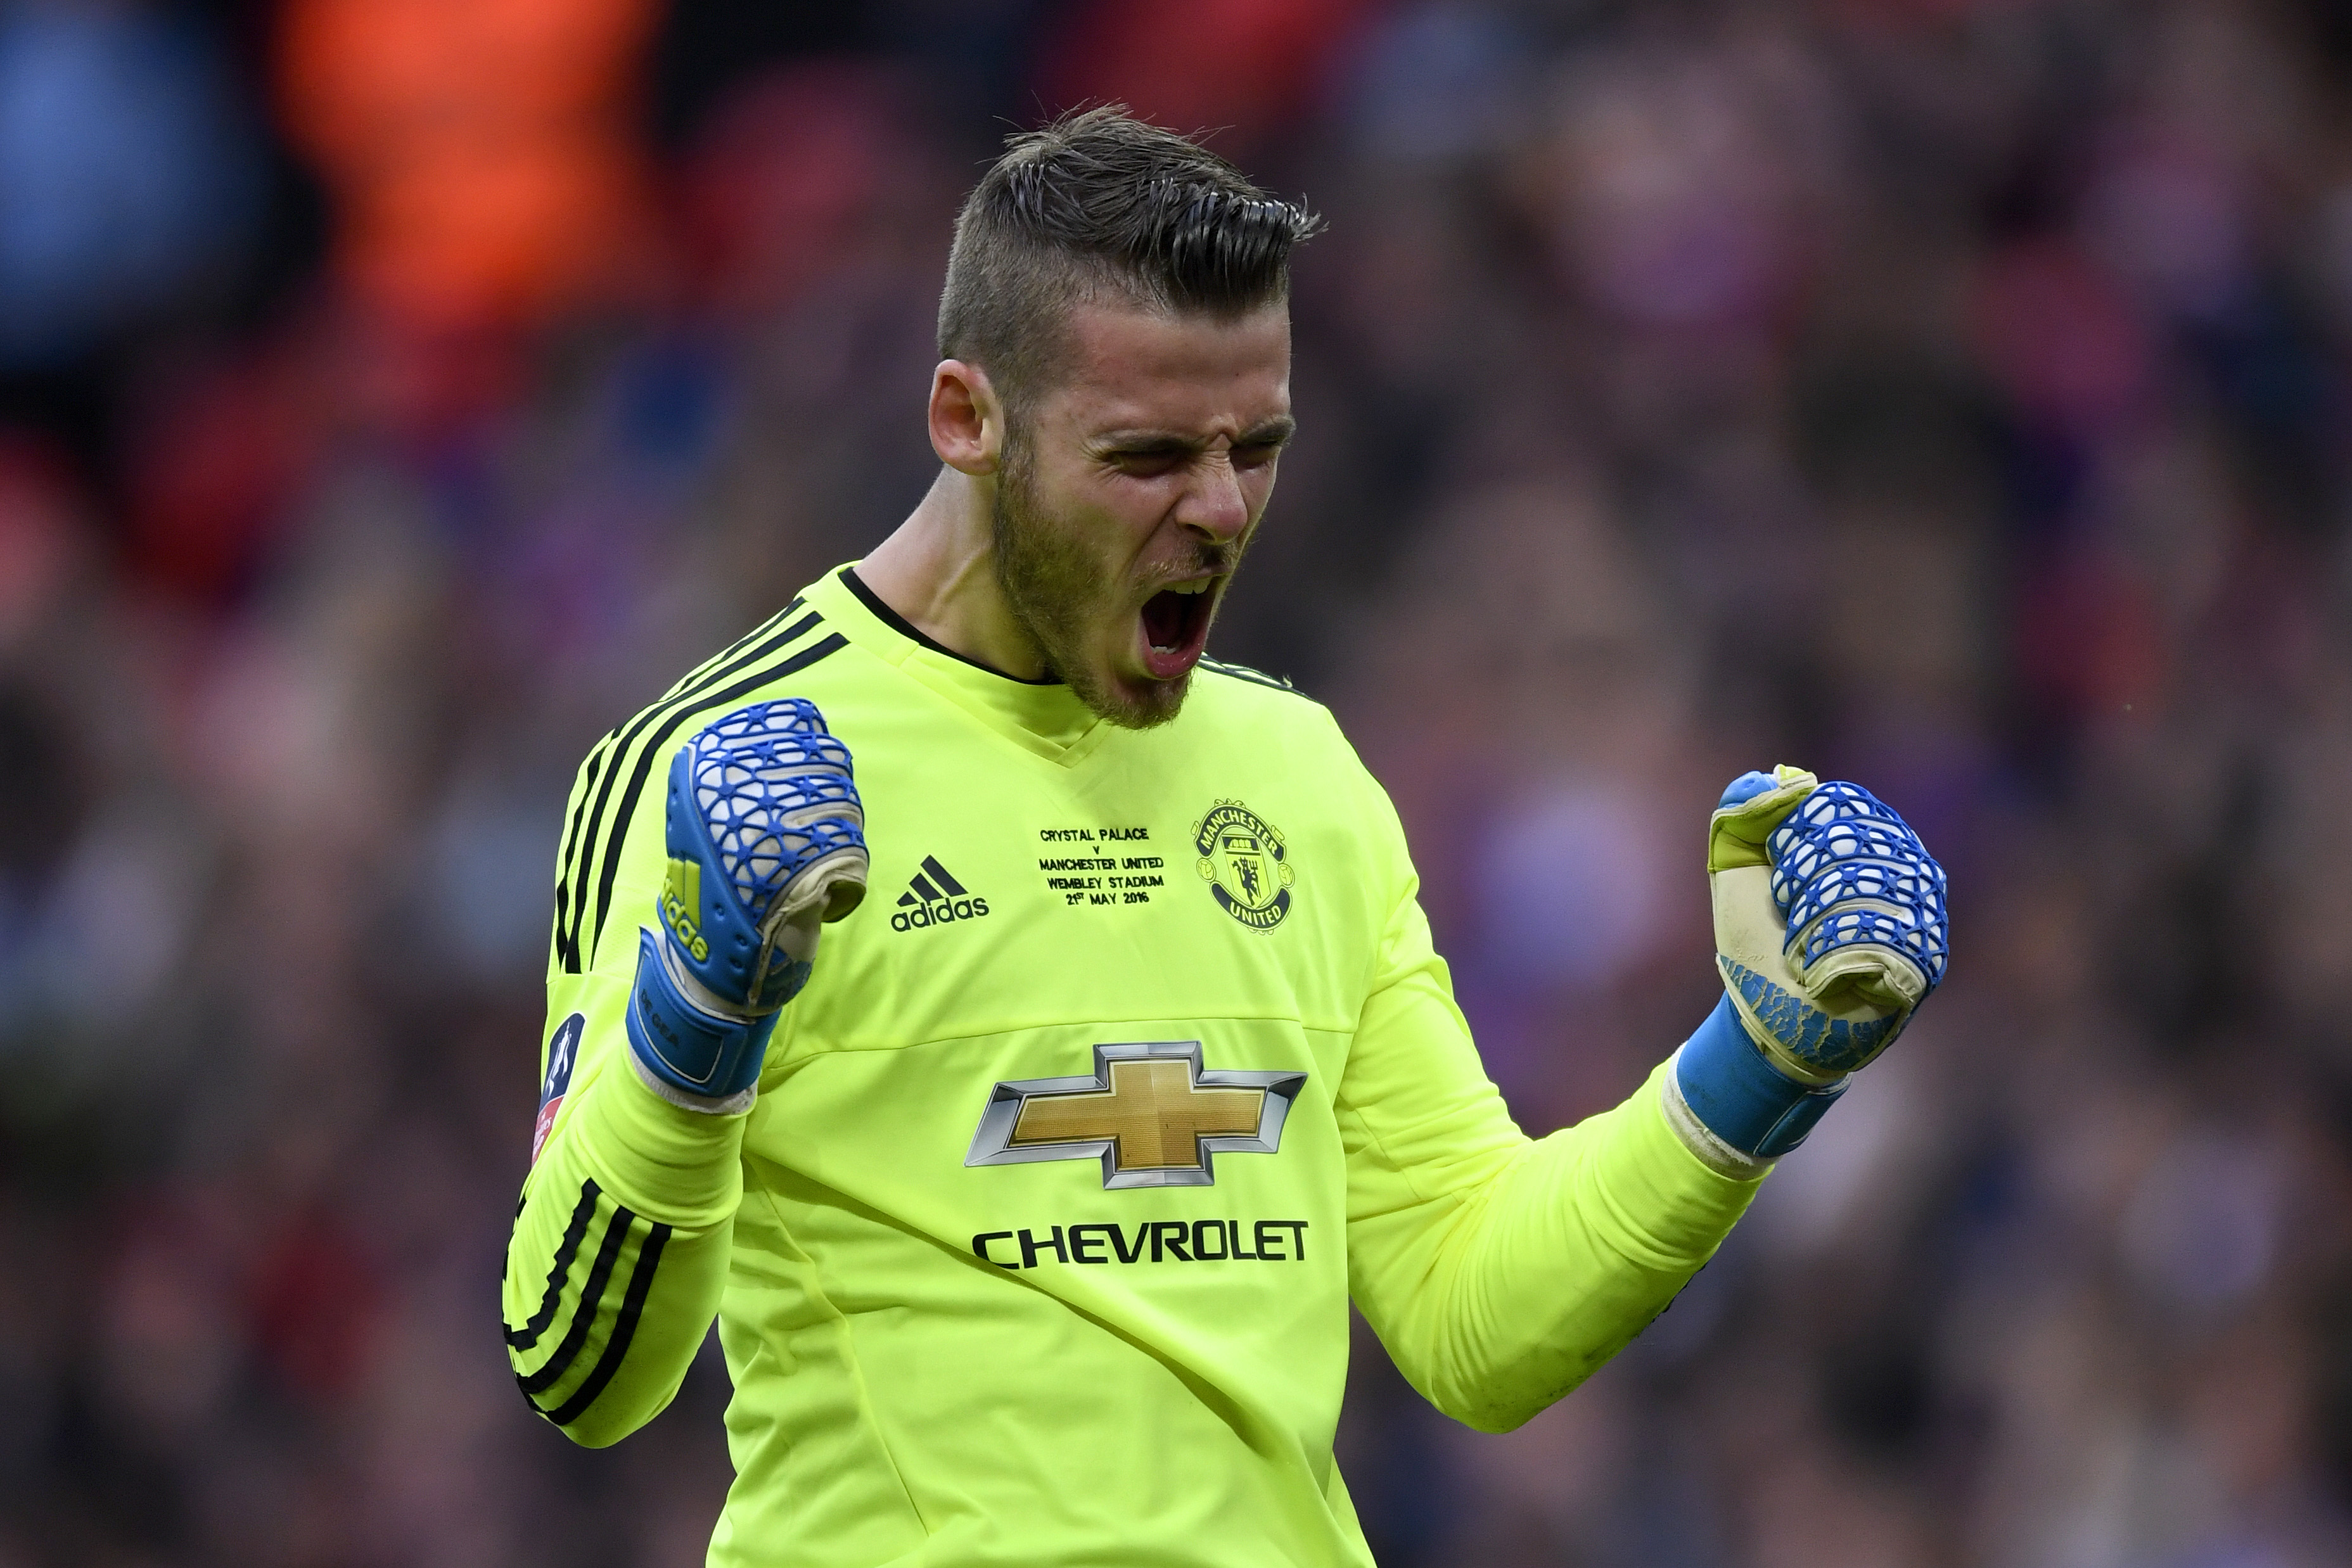 LONDON, ENGLAND - MAY 21:  David De Gea of Manchester United celebrates as Jesse Lingard of Manchester United scores their second goal during The Emirates FA Cup Final match between Manchester United and Crystal Palace at Wembley Stadium on May 21, 2016 in London, England.  (Photo by Mike Hewitt/Getty Images)